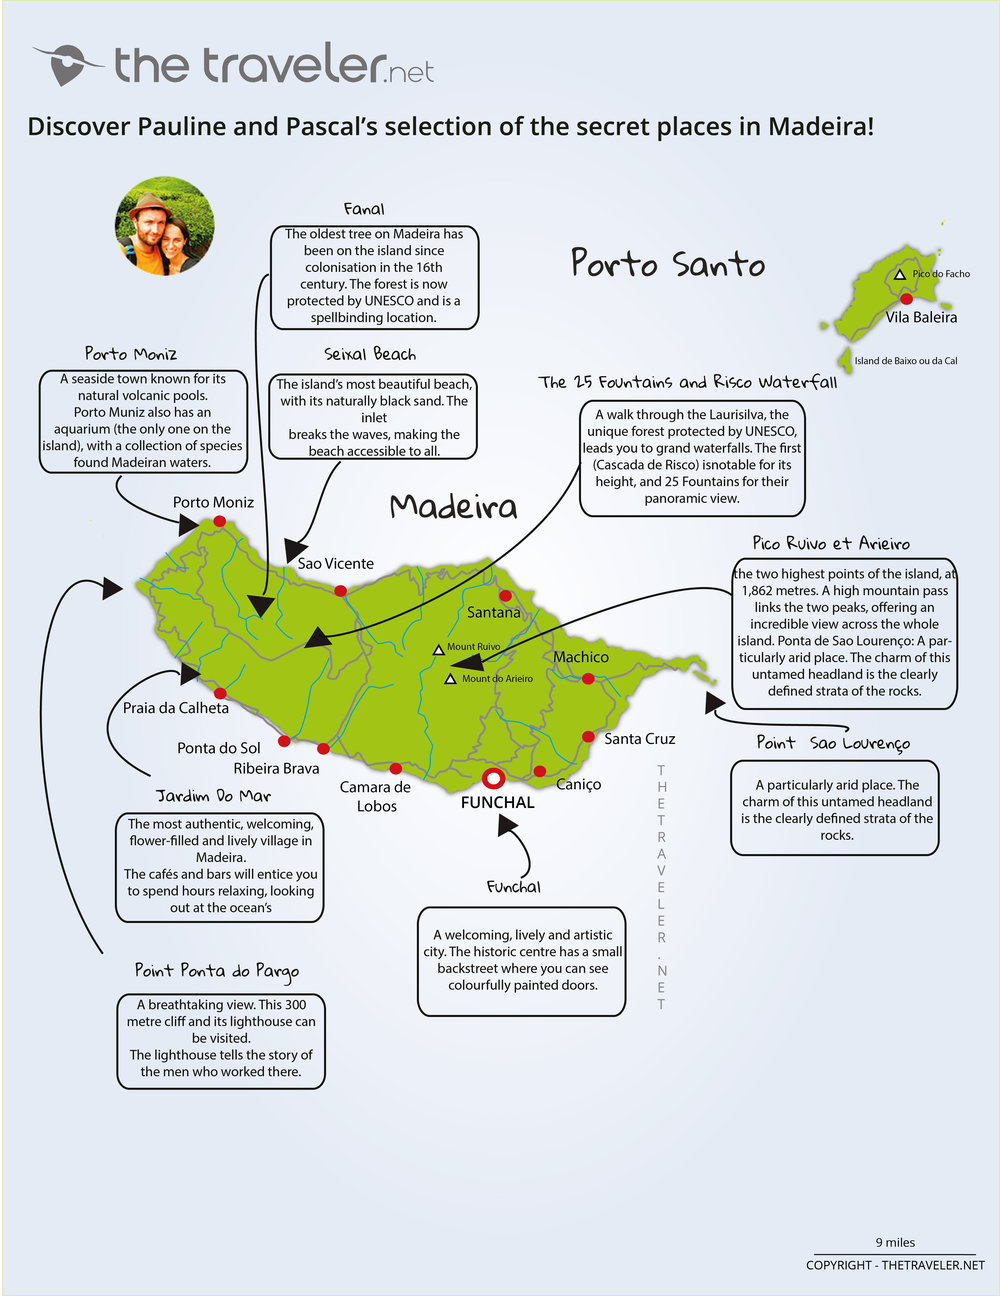 Portugal - PDF tourist map - tourist attractions, What to see? Guide.